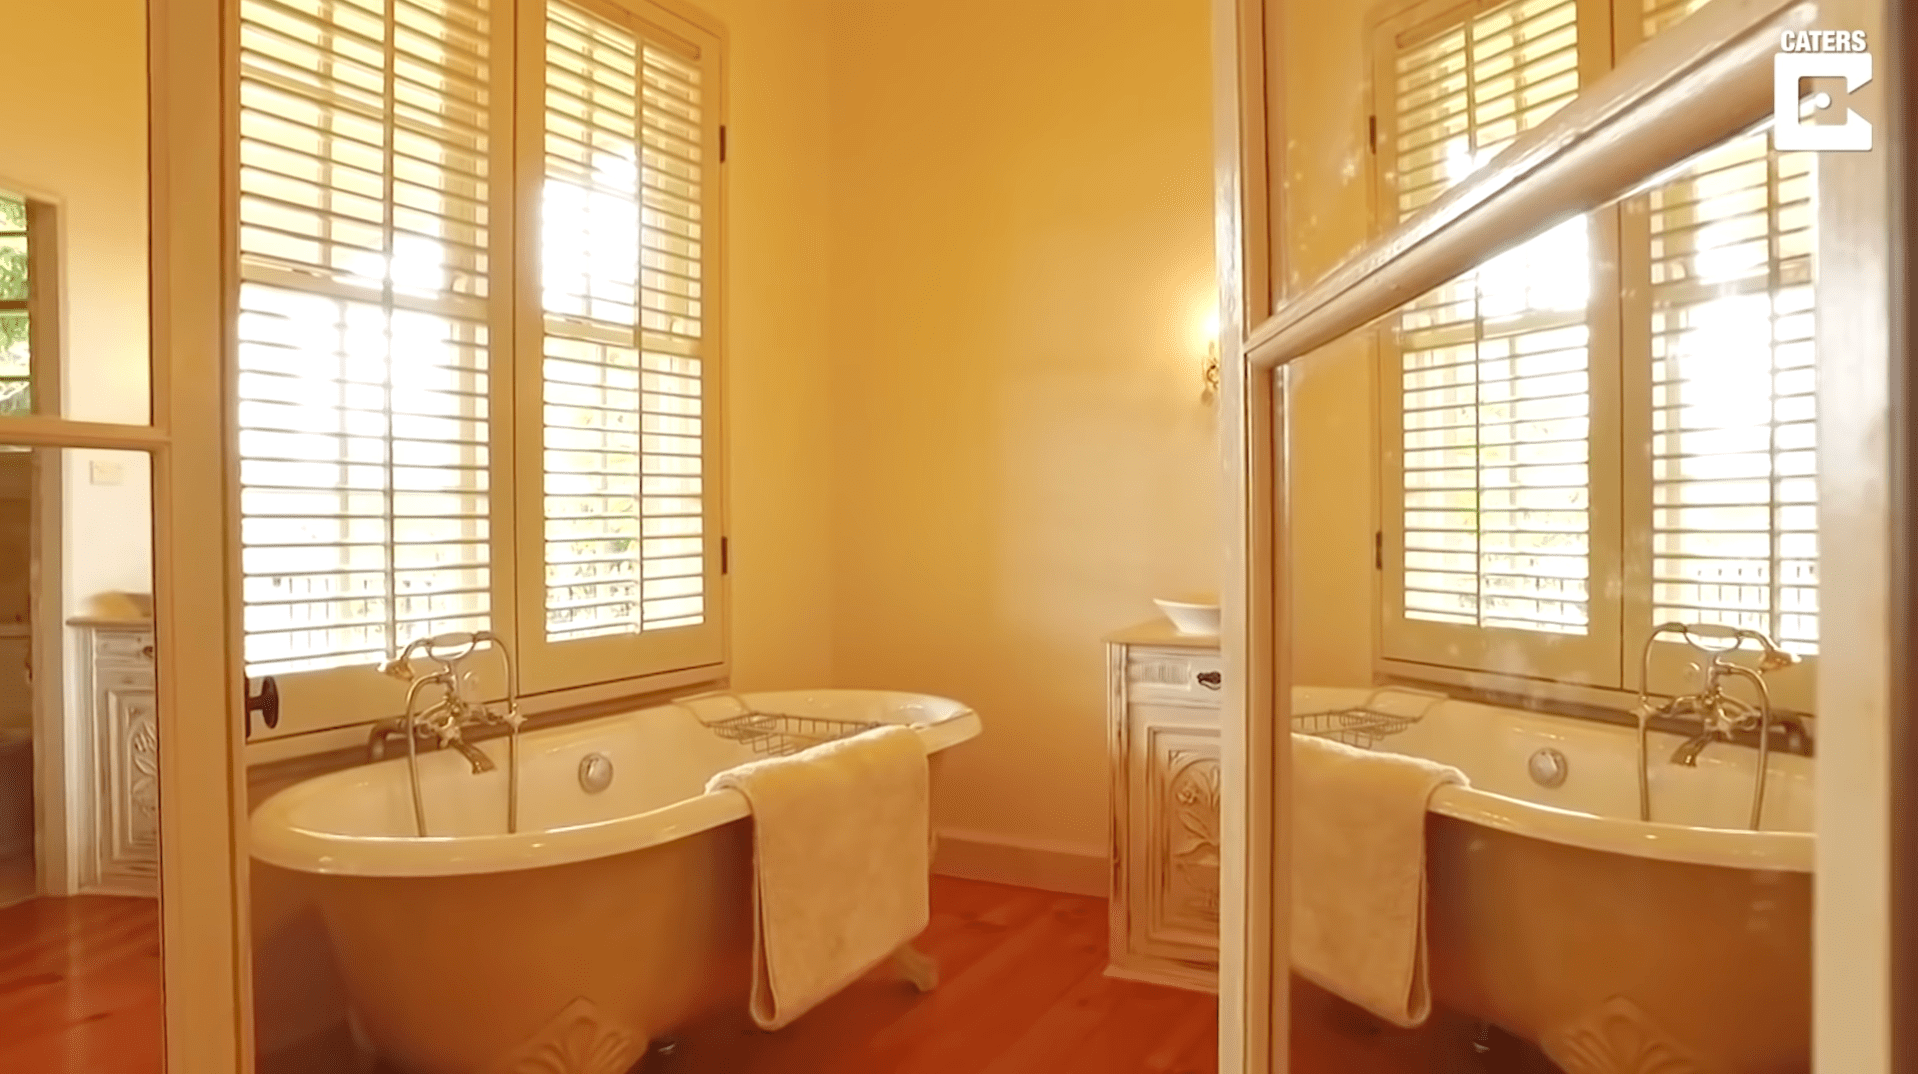 One of the ensuite bathrooms in the house | Source: YouTube/Caters Clips